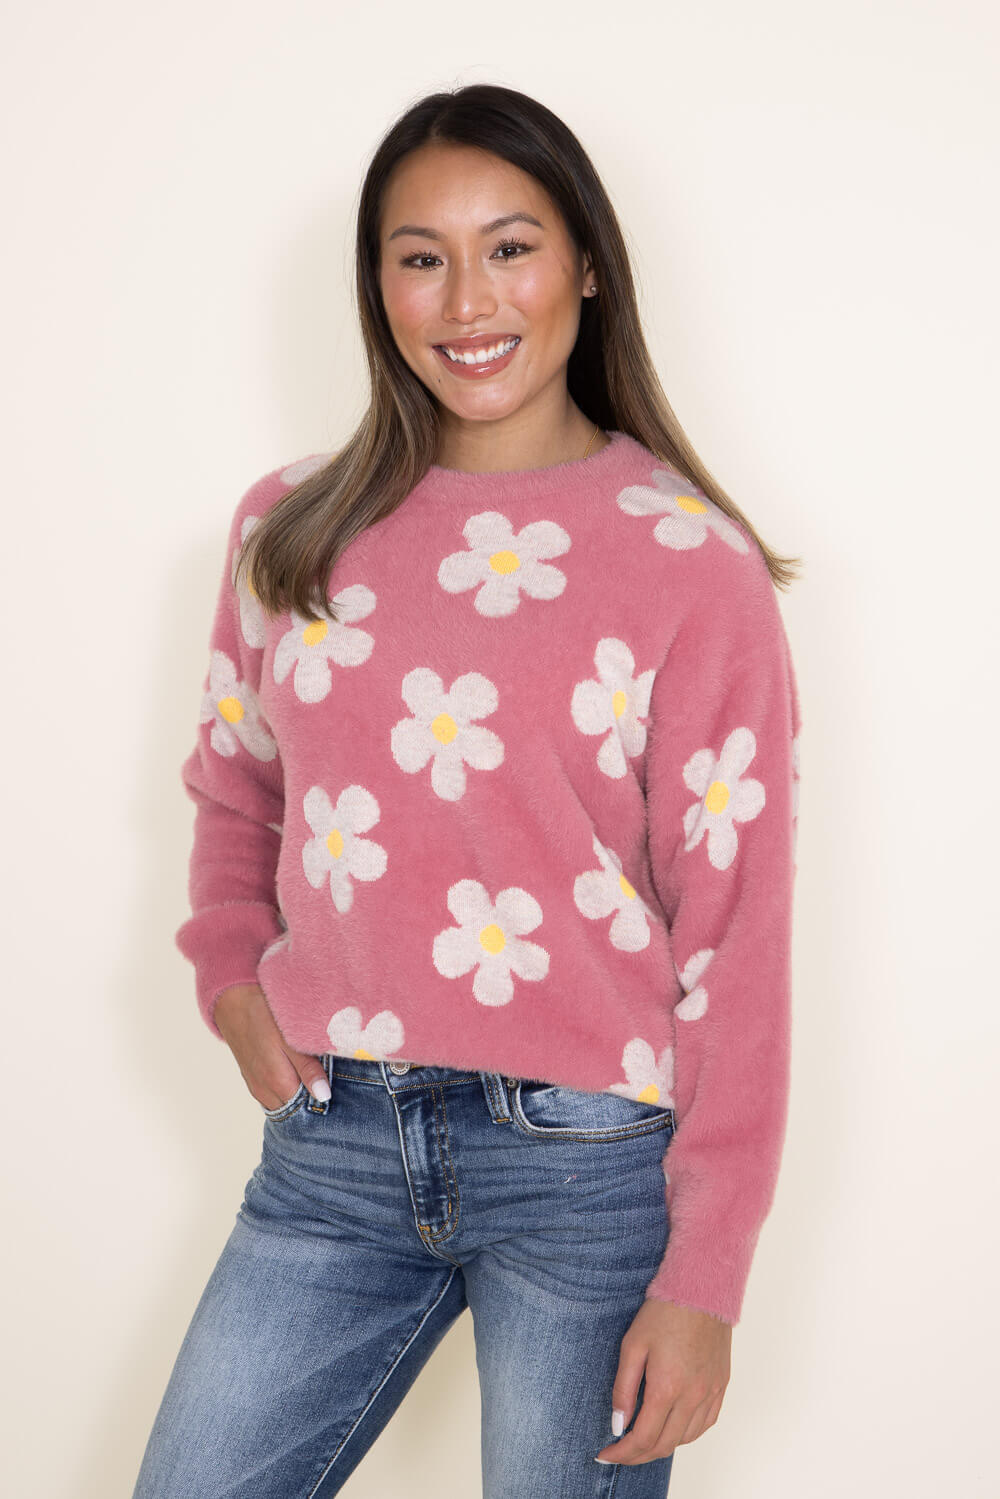 Simply Southern Fuzzy Daisy Print Crewneck Sweater for Women in Pink